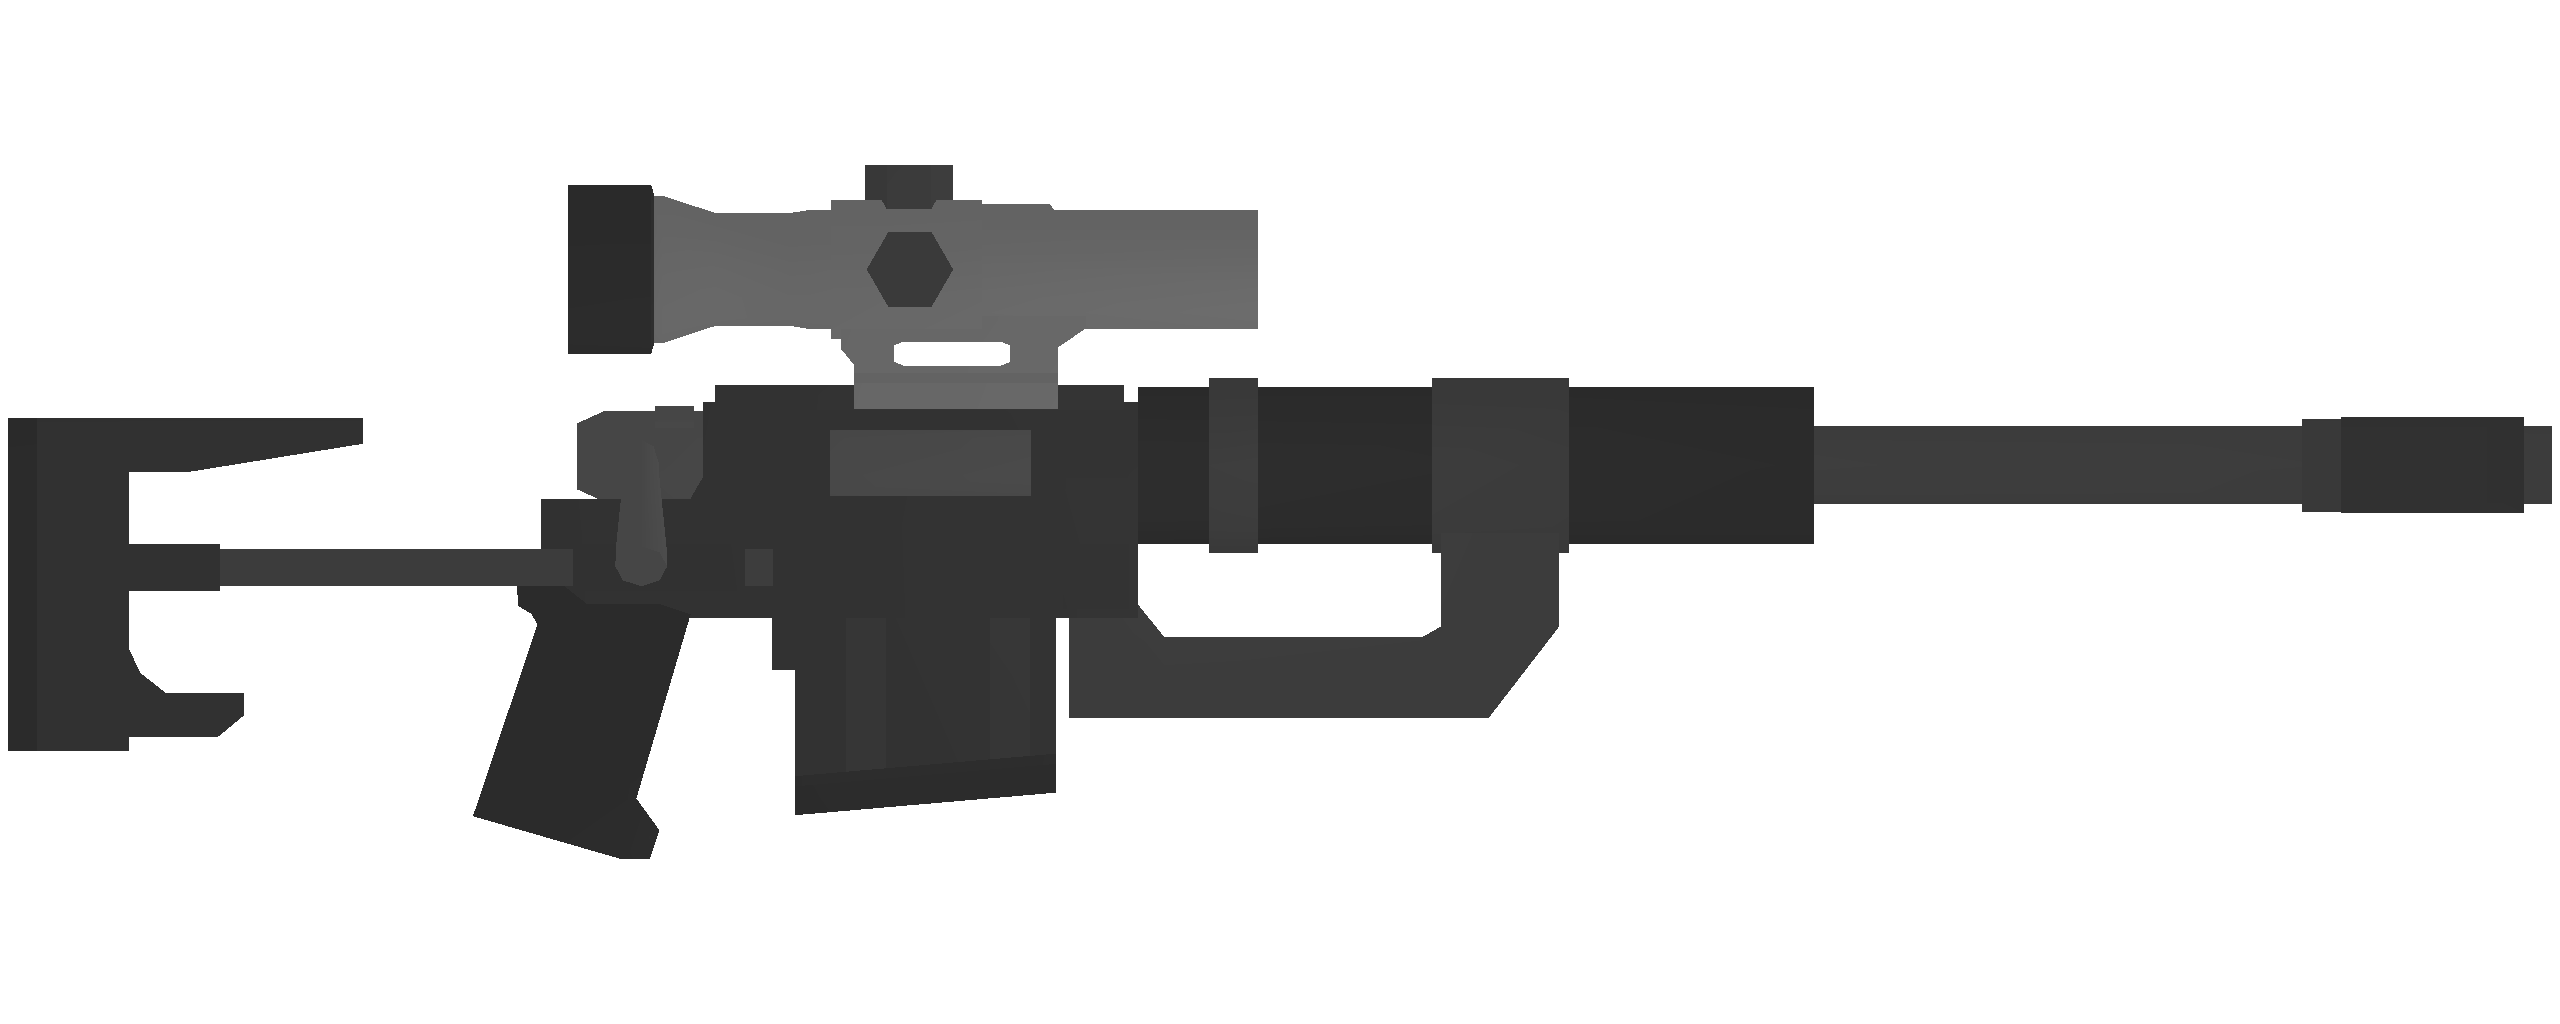 Unturned All ID lists for Magazines and Attachments - Kuwait Items Redux - Sniper Rifles - 0F89F36